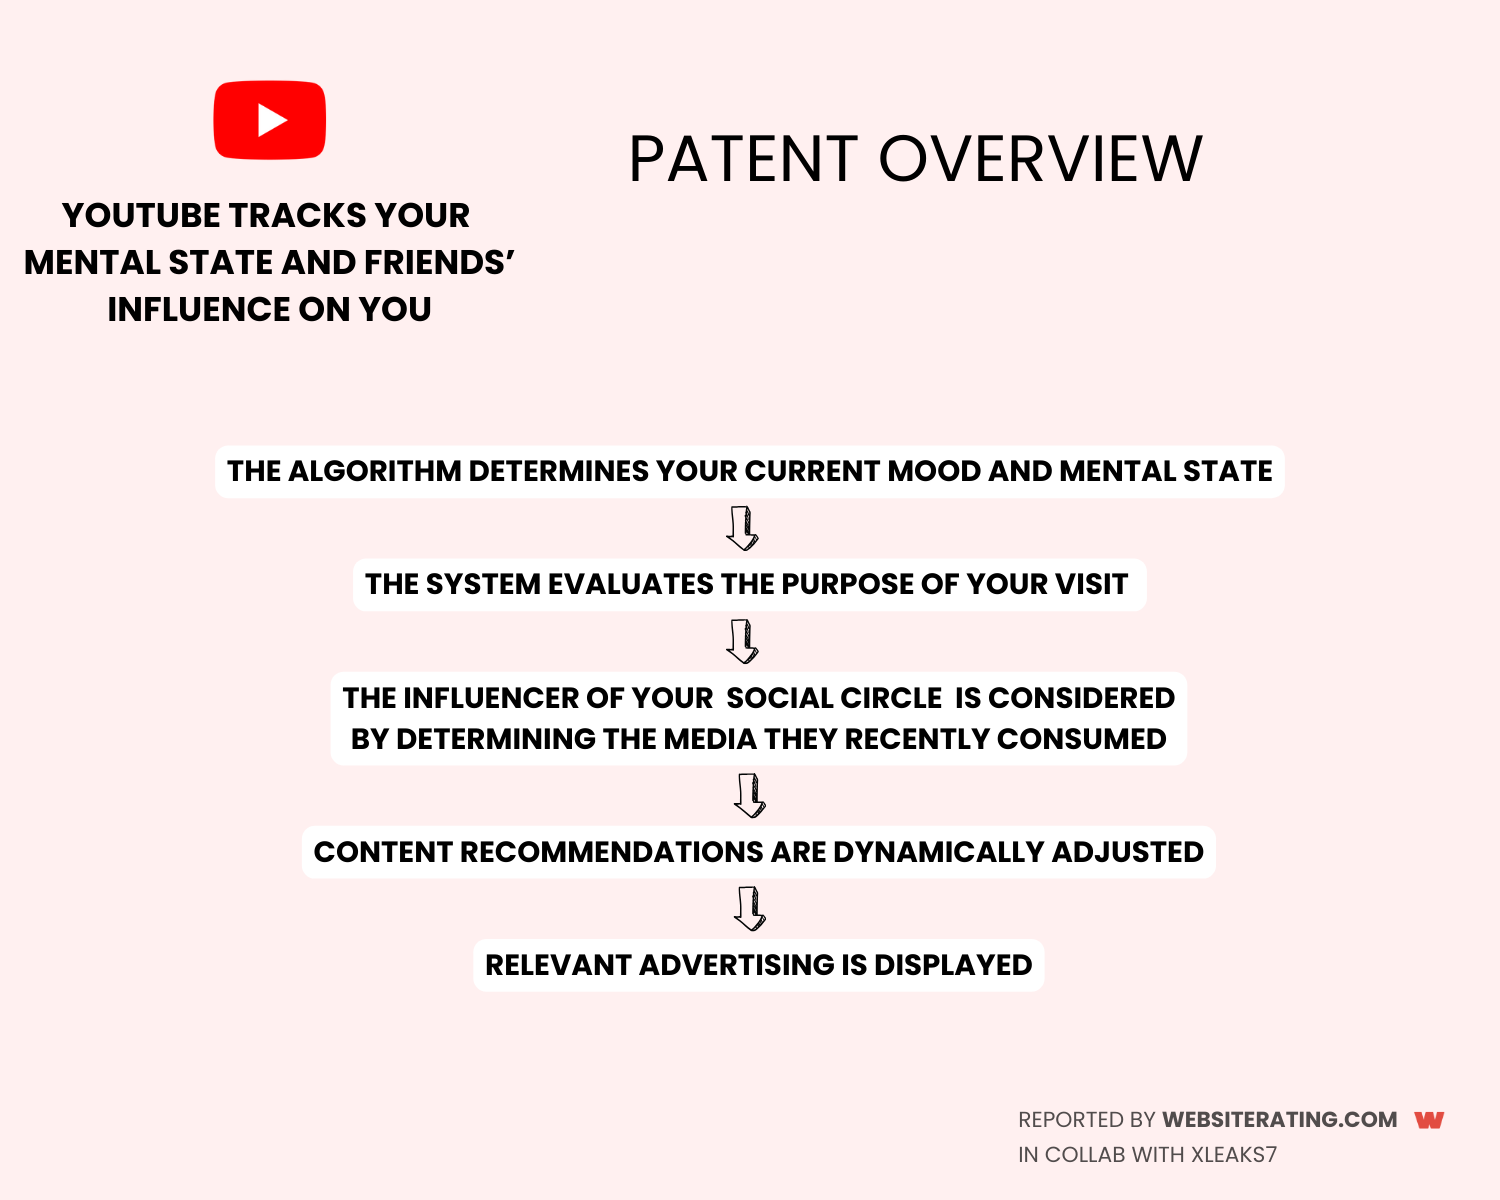 How YouTube tracks your mental state and the influence of your social circle to recommend videos to watch